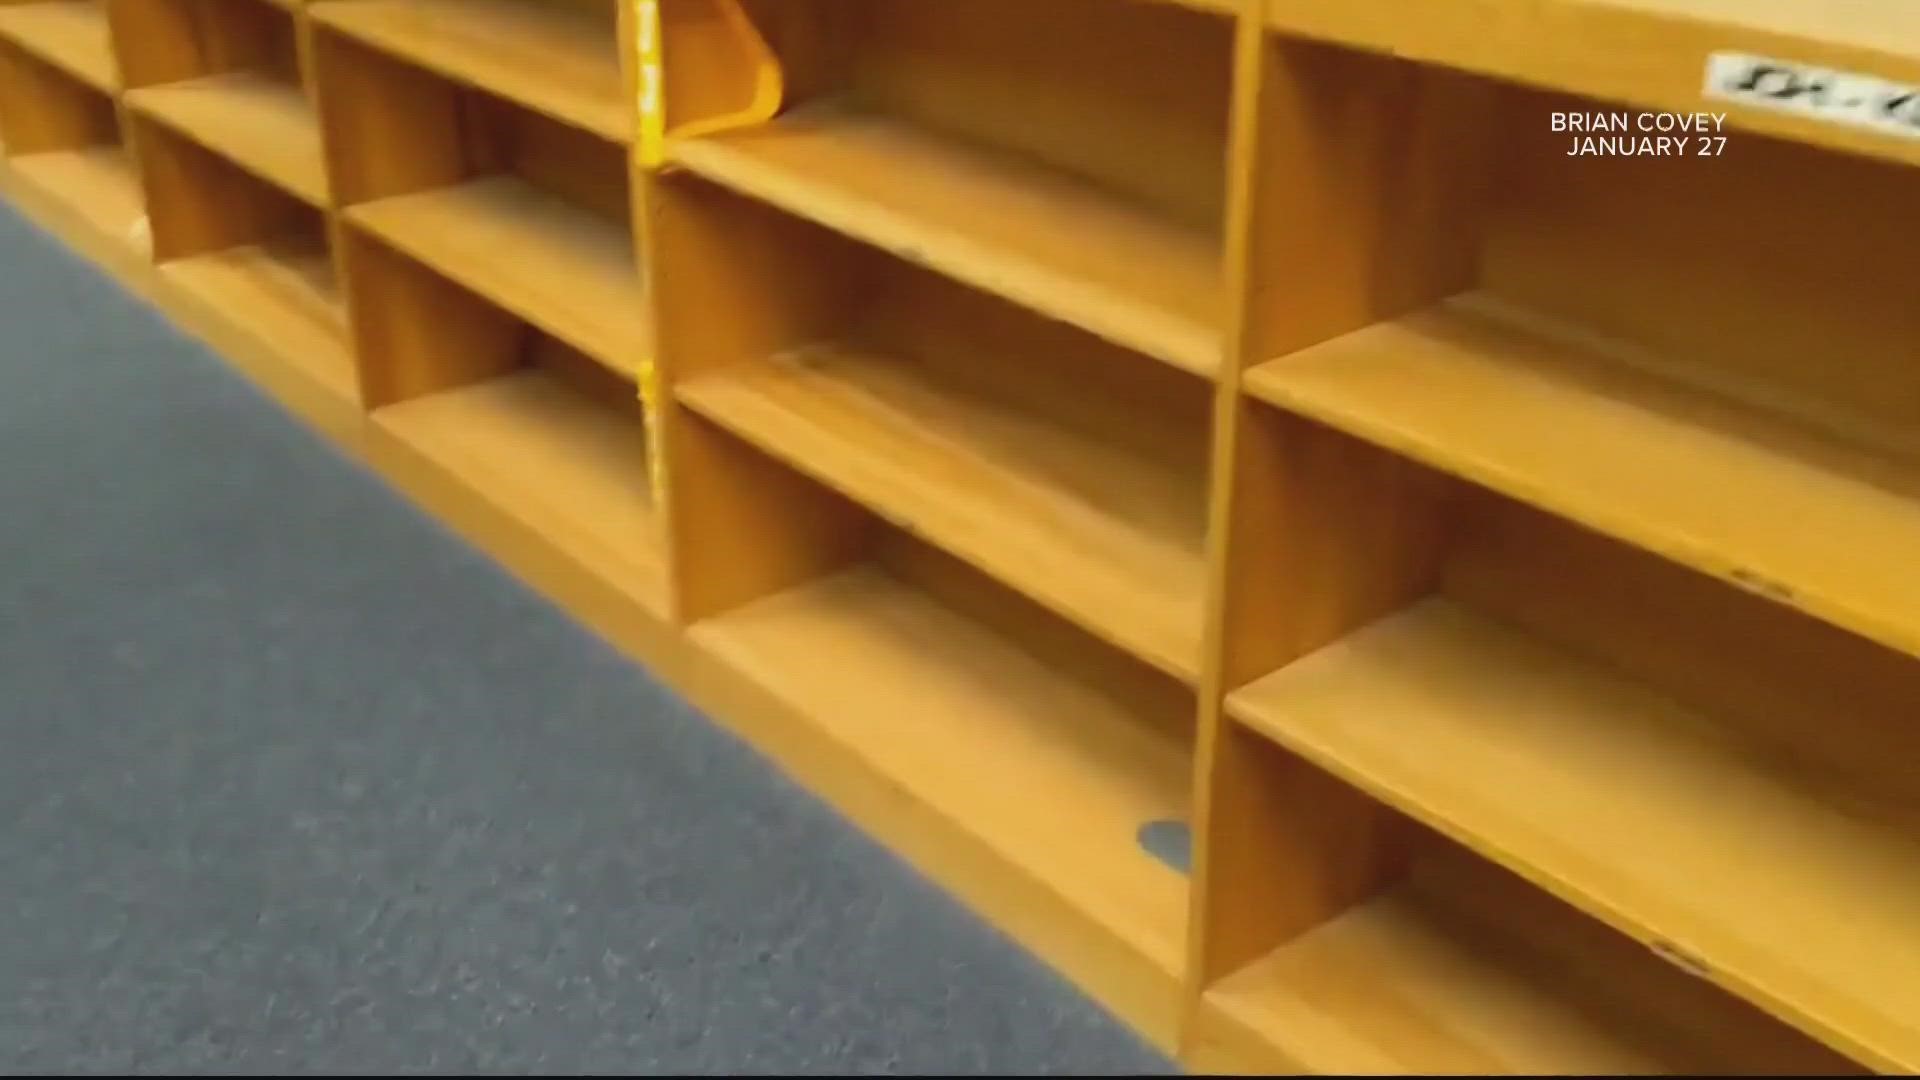 Three weeks after posting a video on Twitter showing rows of empty bookshelves at Mandarin Middle School, Brian Covey says he's been fired.